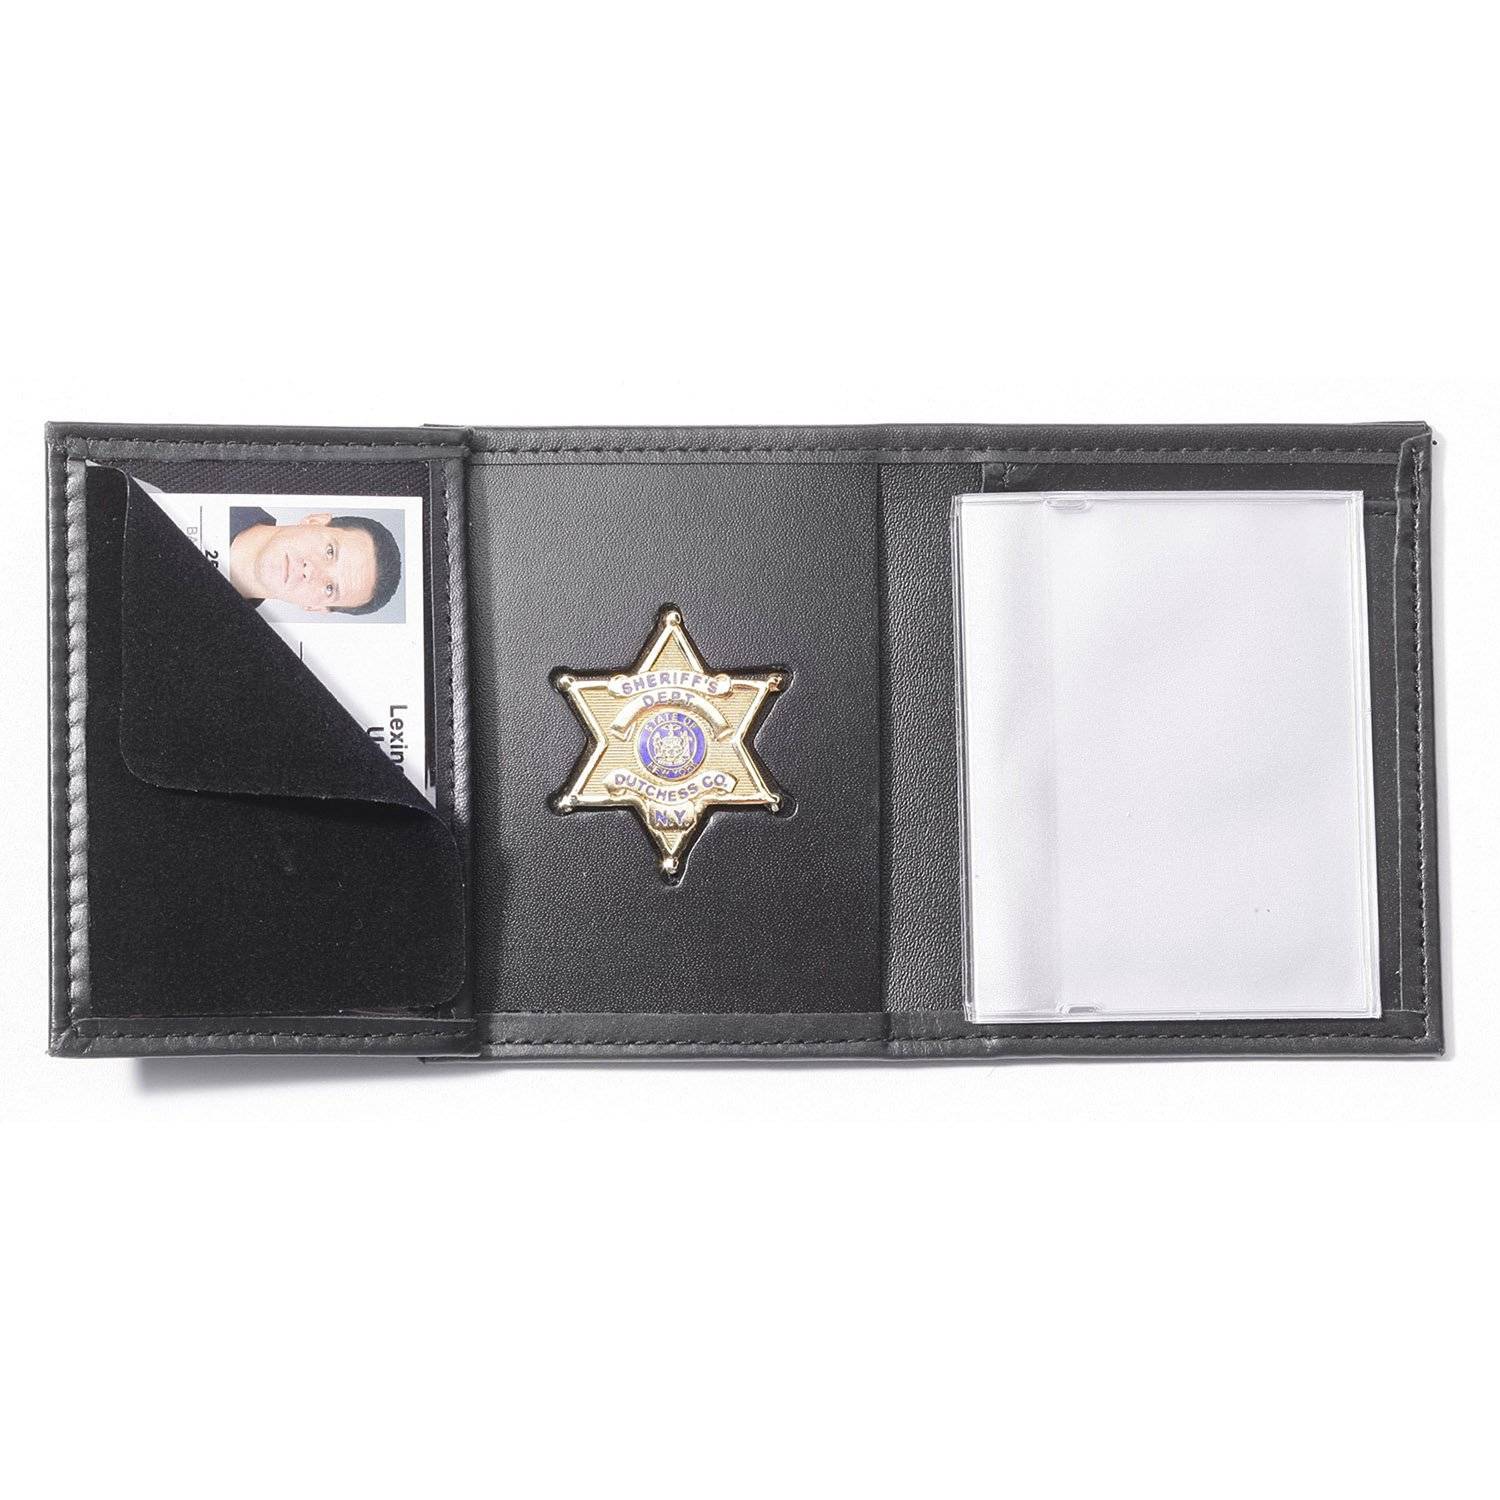 Perfect Fit Recessed Badge Wallet with Credit Card Slots and